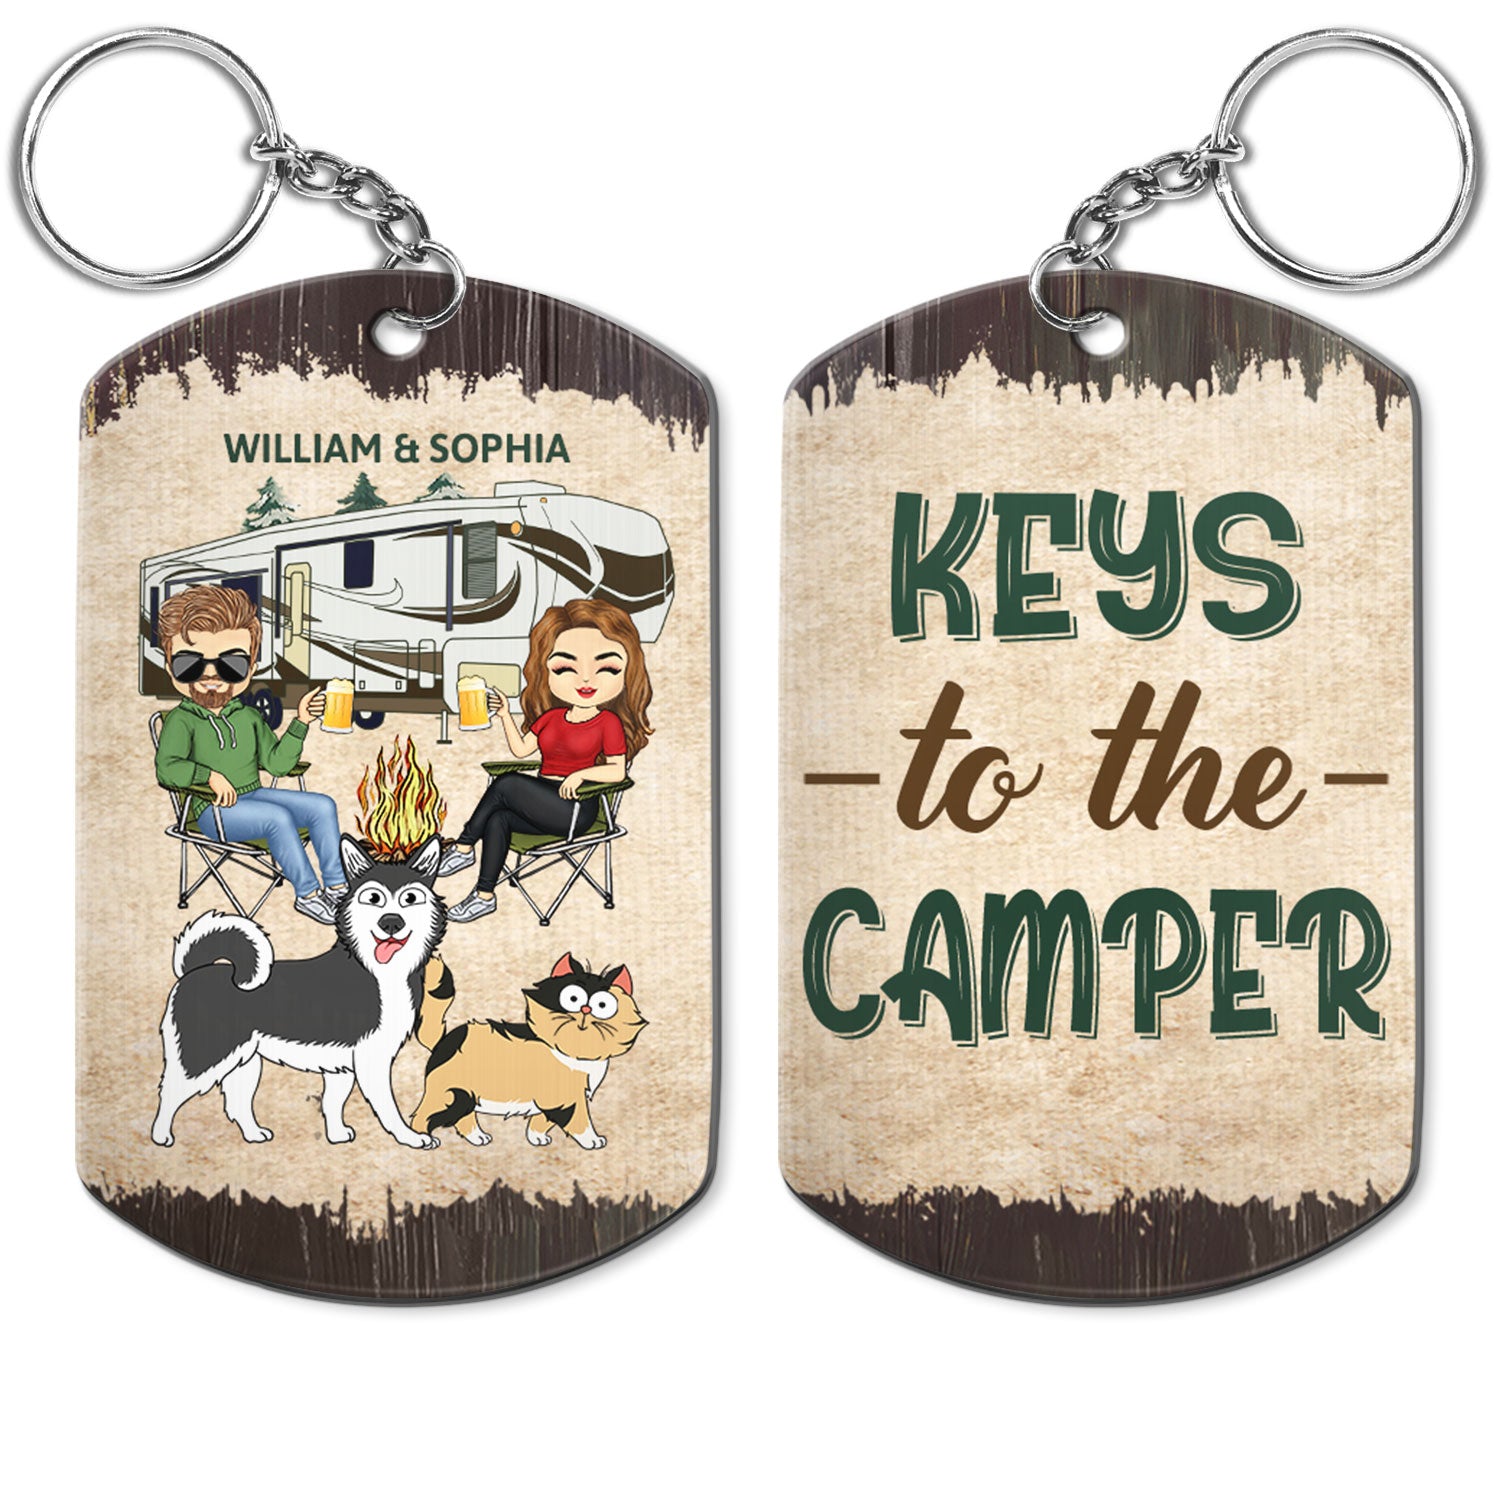 Keys To The Camper Walking Dog Cat - Anniversary, Loving Gifts For Couples, Camping Lovers - Personalized Aluminum Keychain